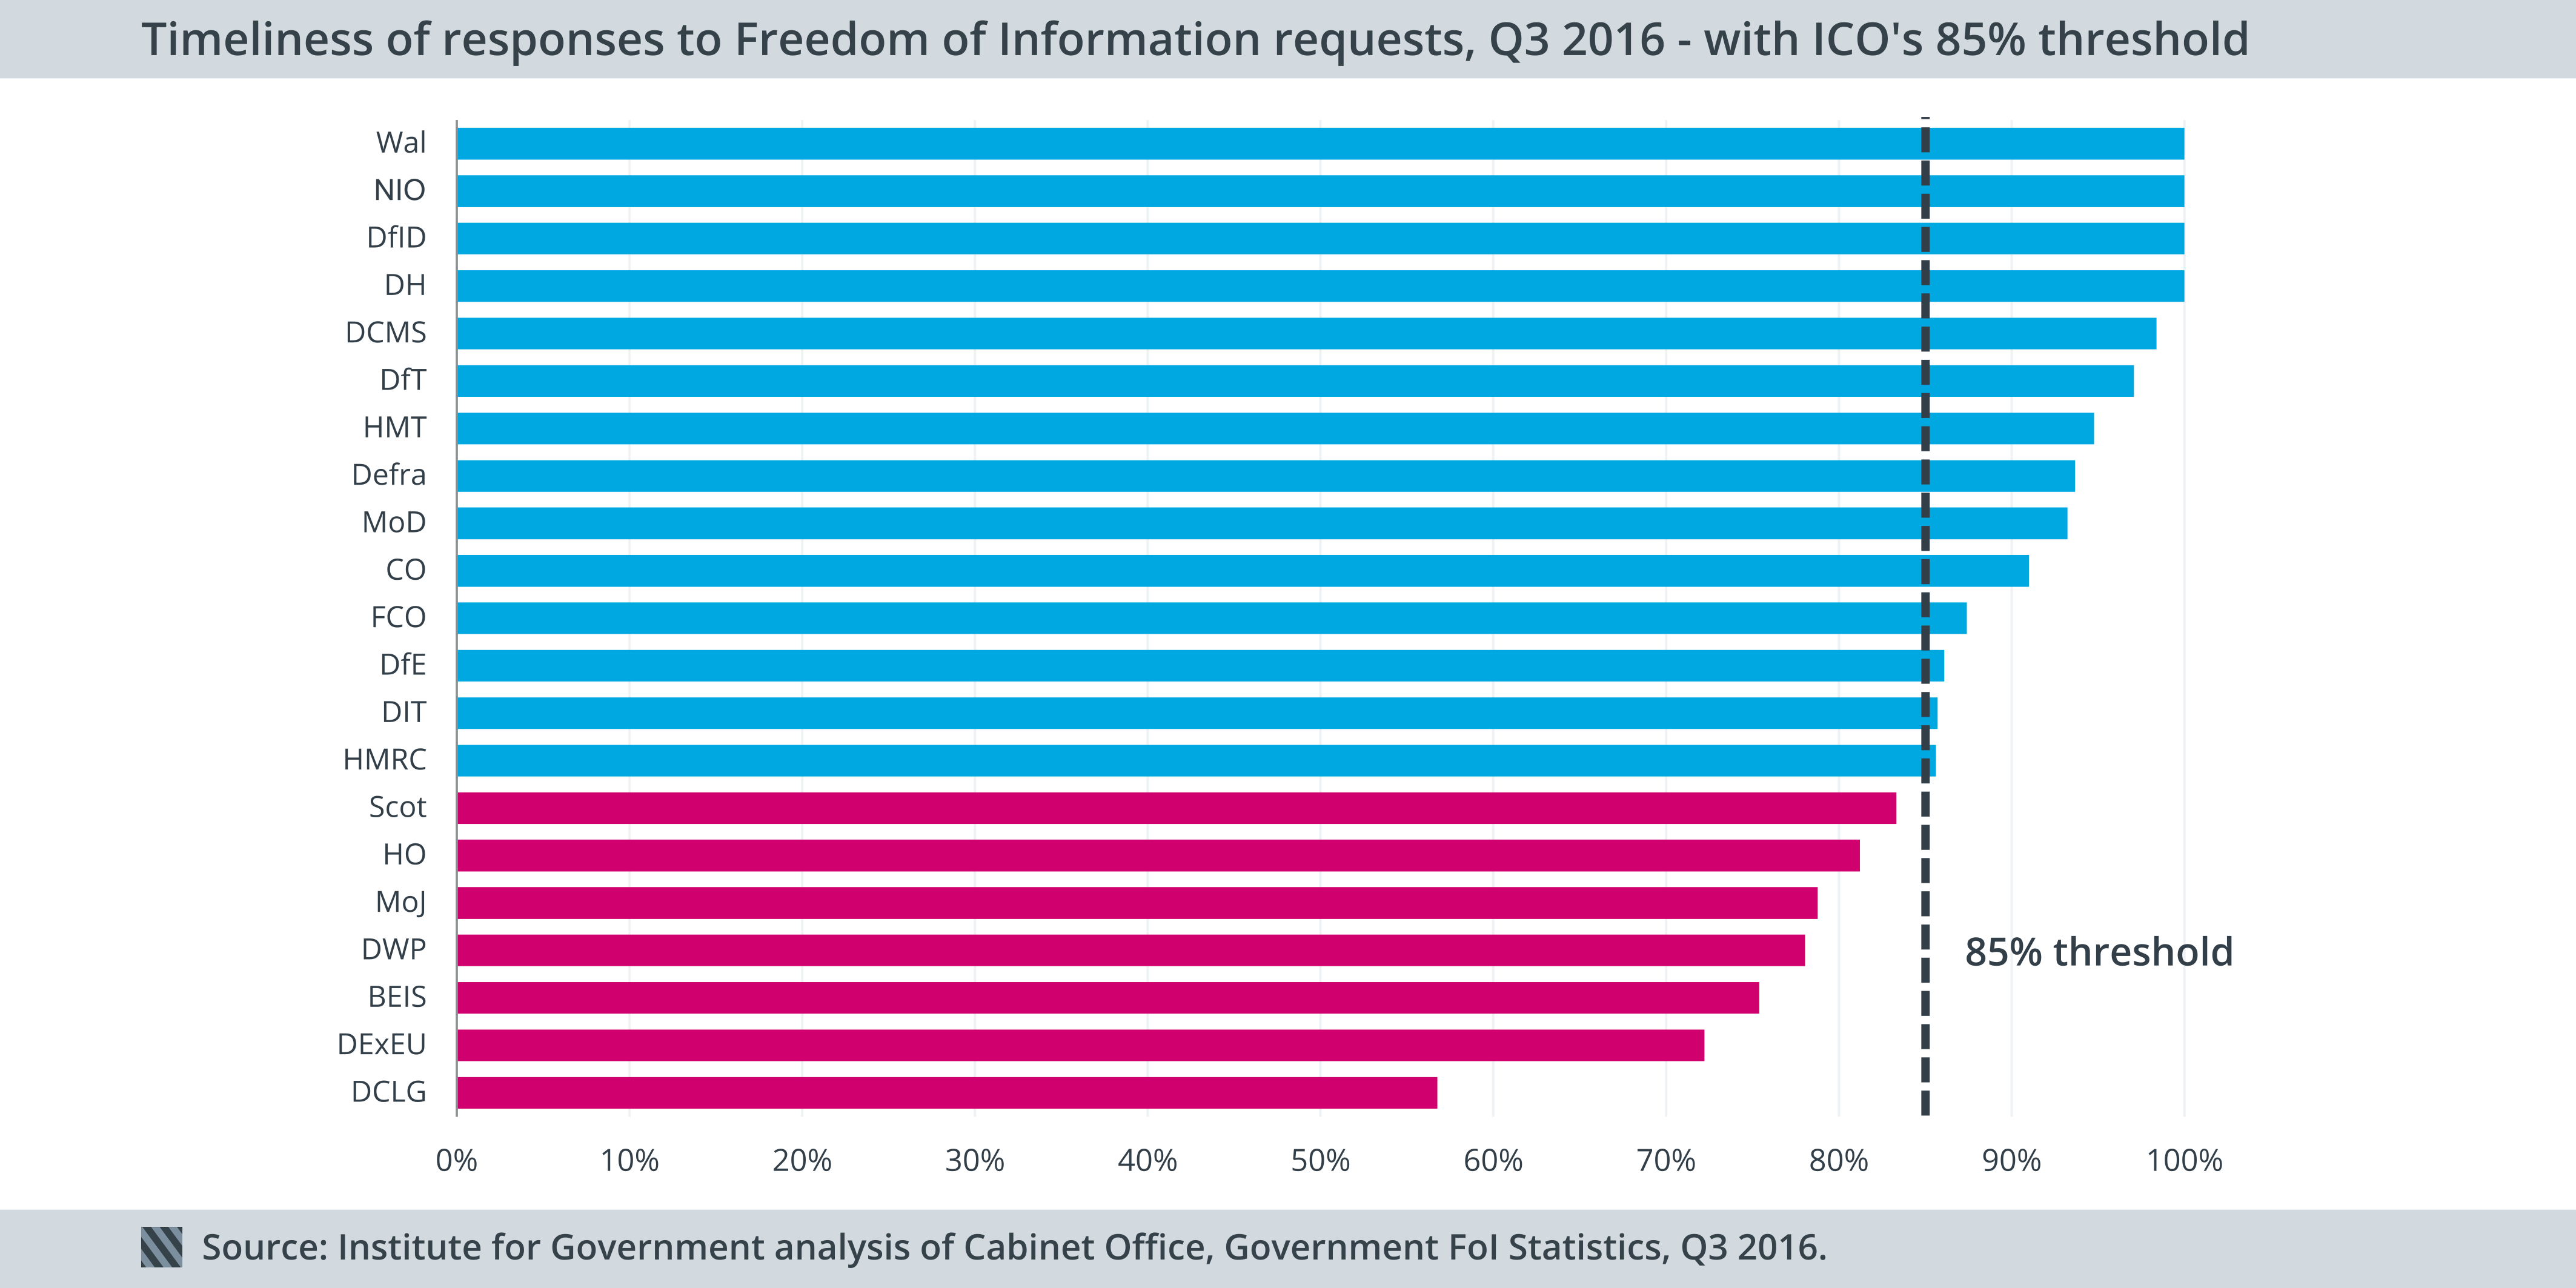 Freedom of Information - timeliness of responses by department, Q3 2016